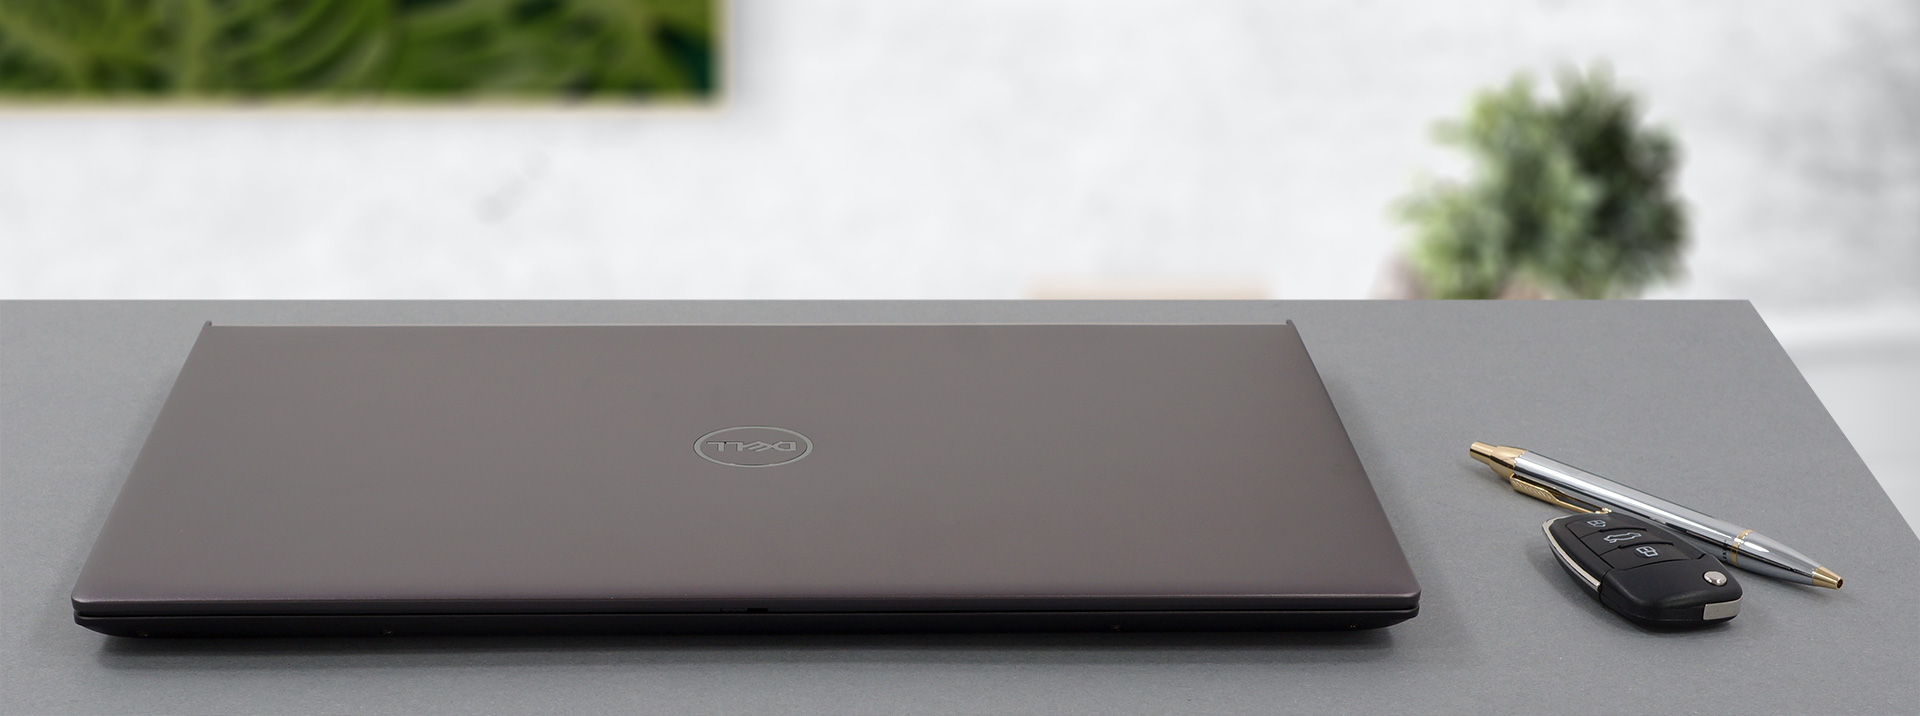 Dell Vostro   review   its great potential is hindered by